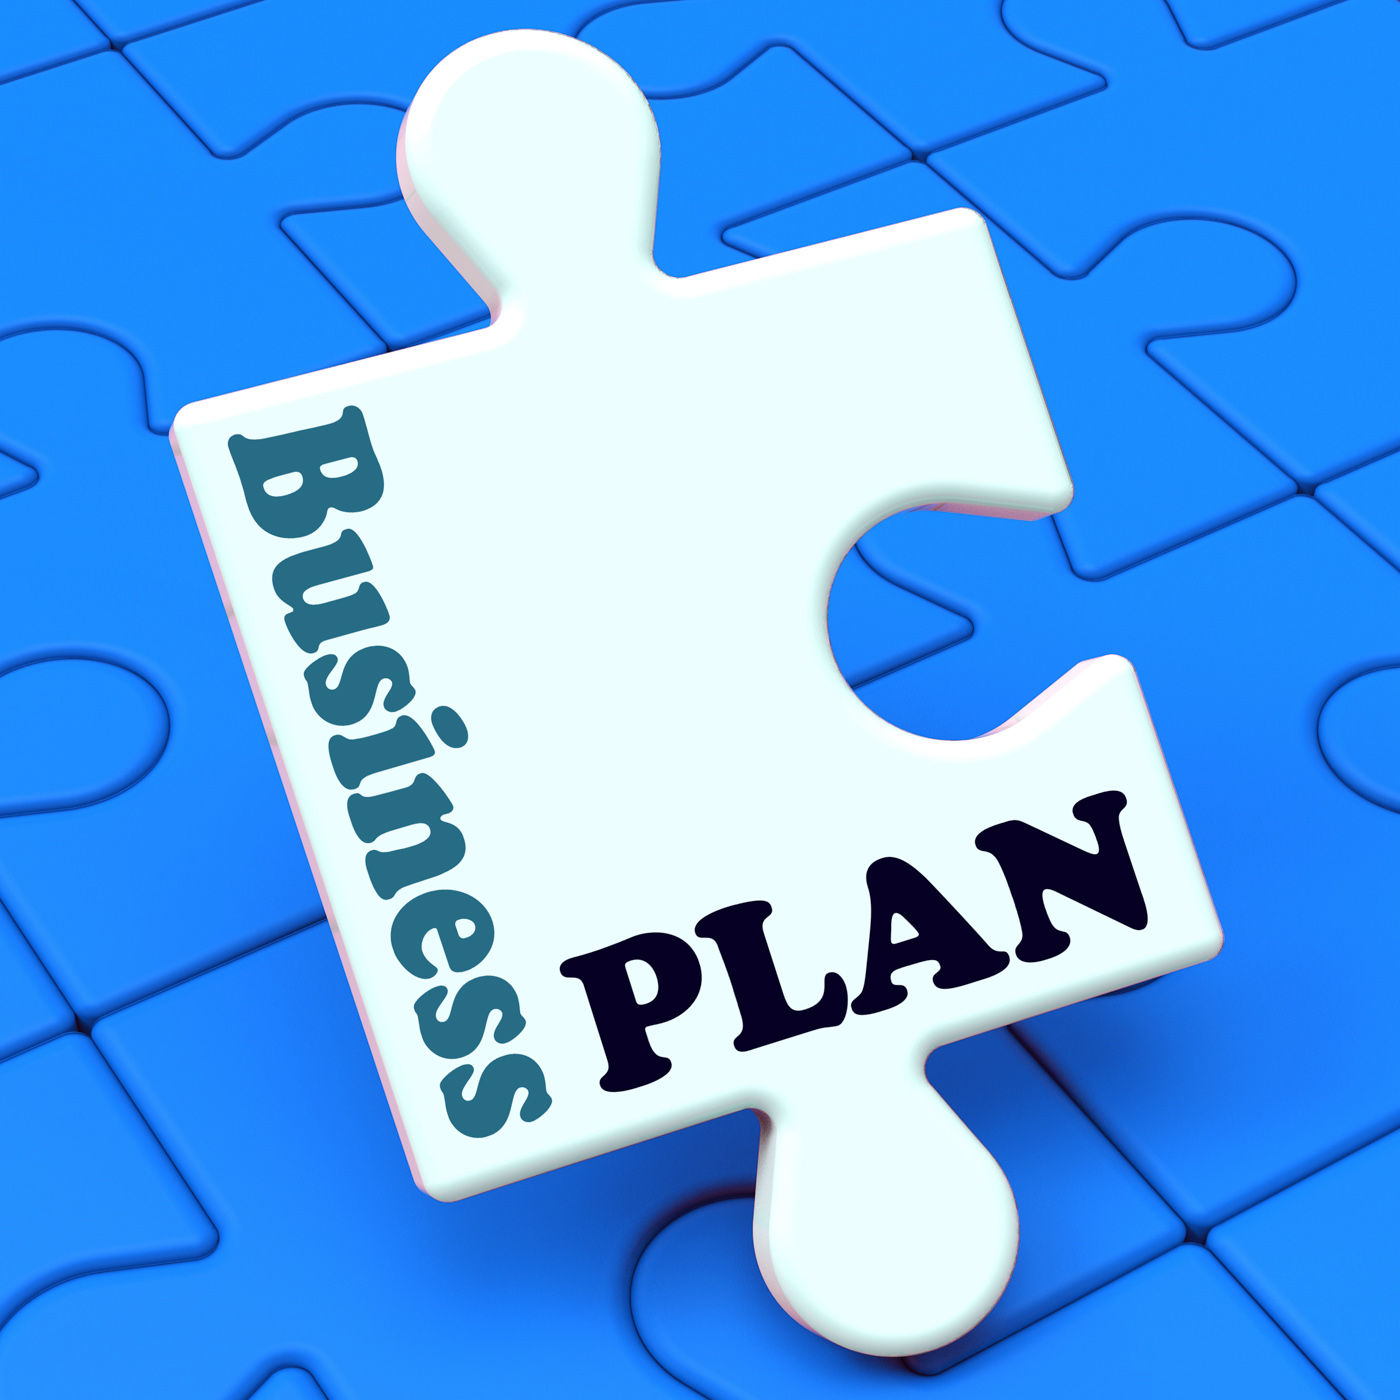 Business Plan Shows Management Growth Strategy, Business, Progress, Tactics, Successful, HQ Photo